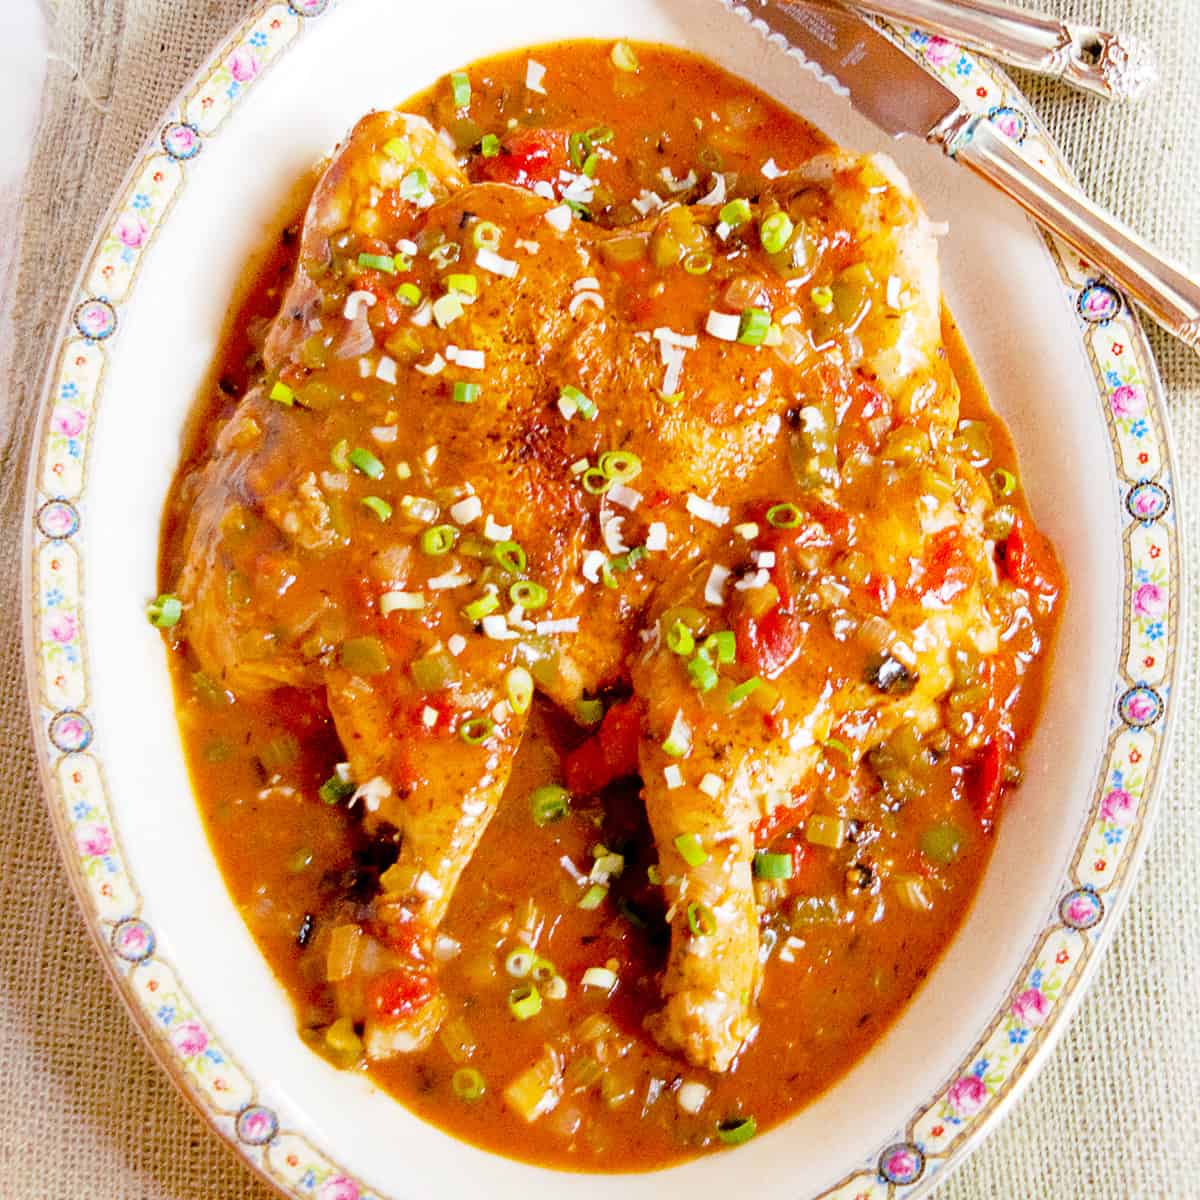 Creole Style Smothered Chicken Recipe - Lana's Cooking